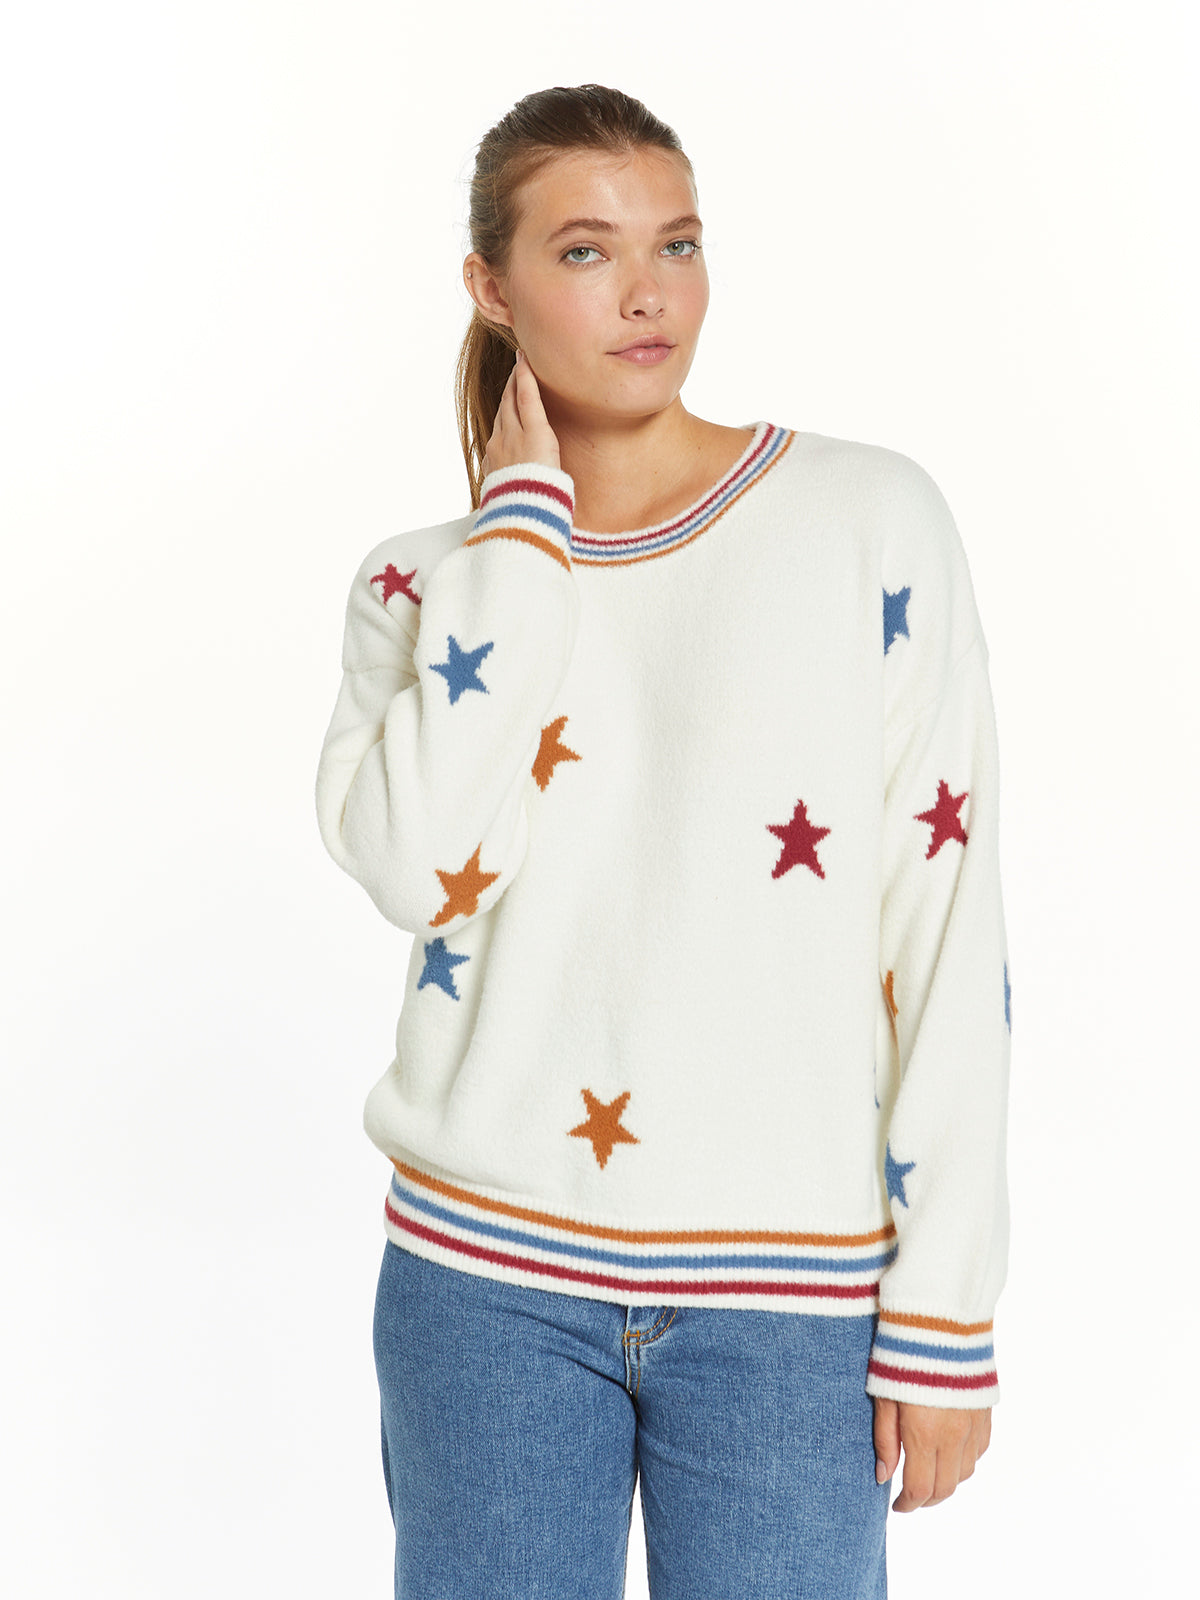 WHIMSY SWEATER - PRE PACK 6 UNITS